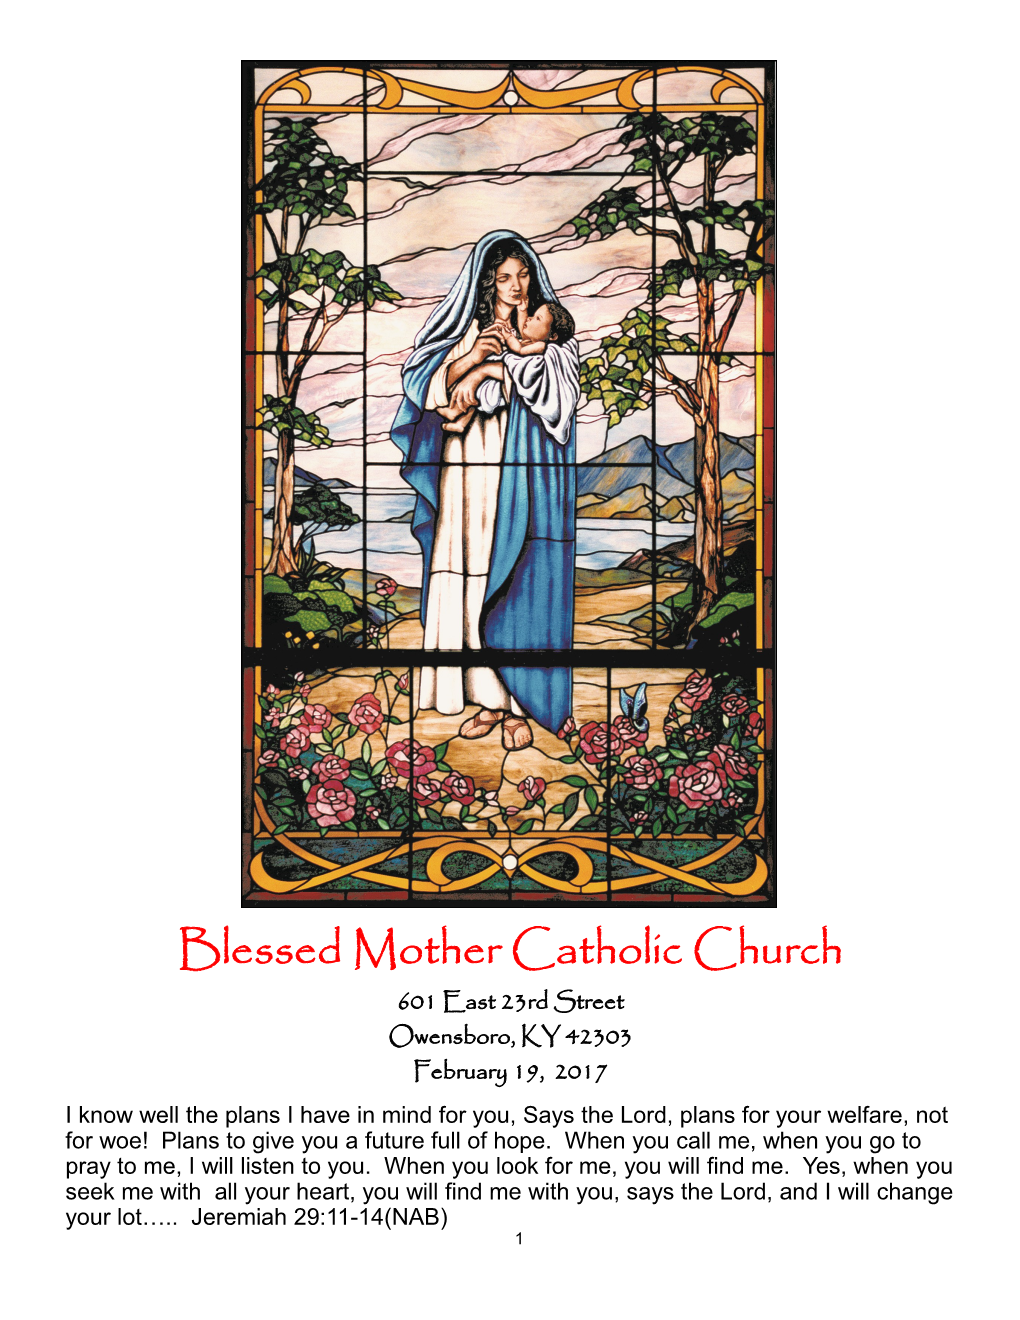 Blessed Mother Catholic Church 601 East 23Rd Street Owensboro, KY 42303 February 19, 2017